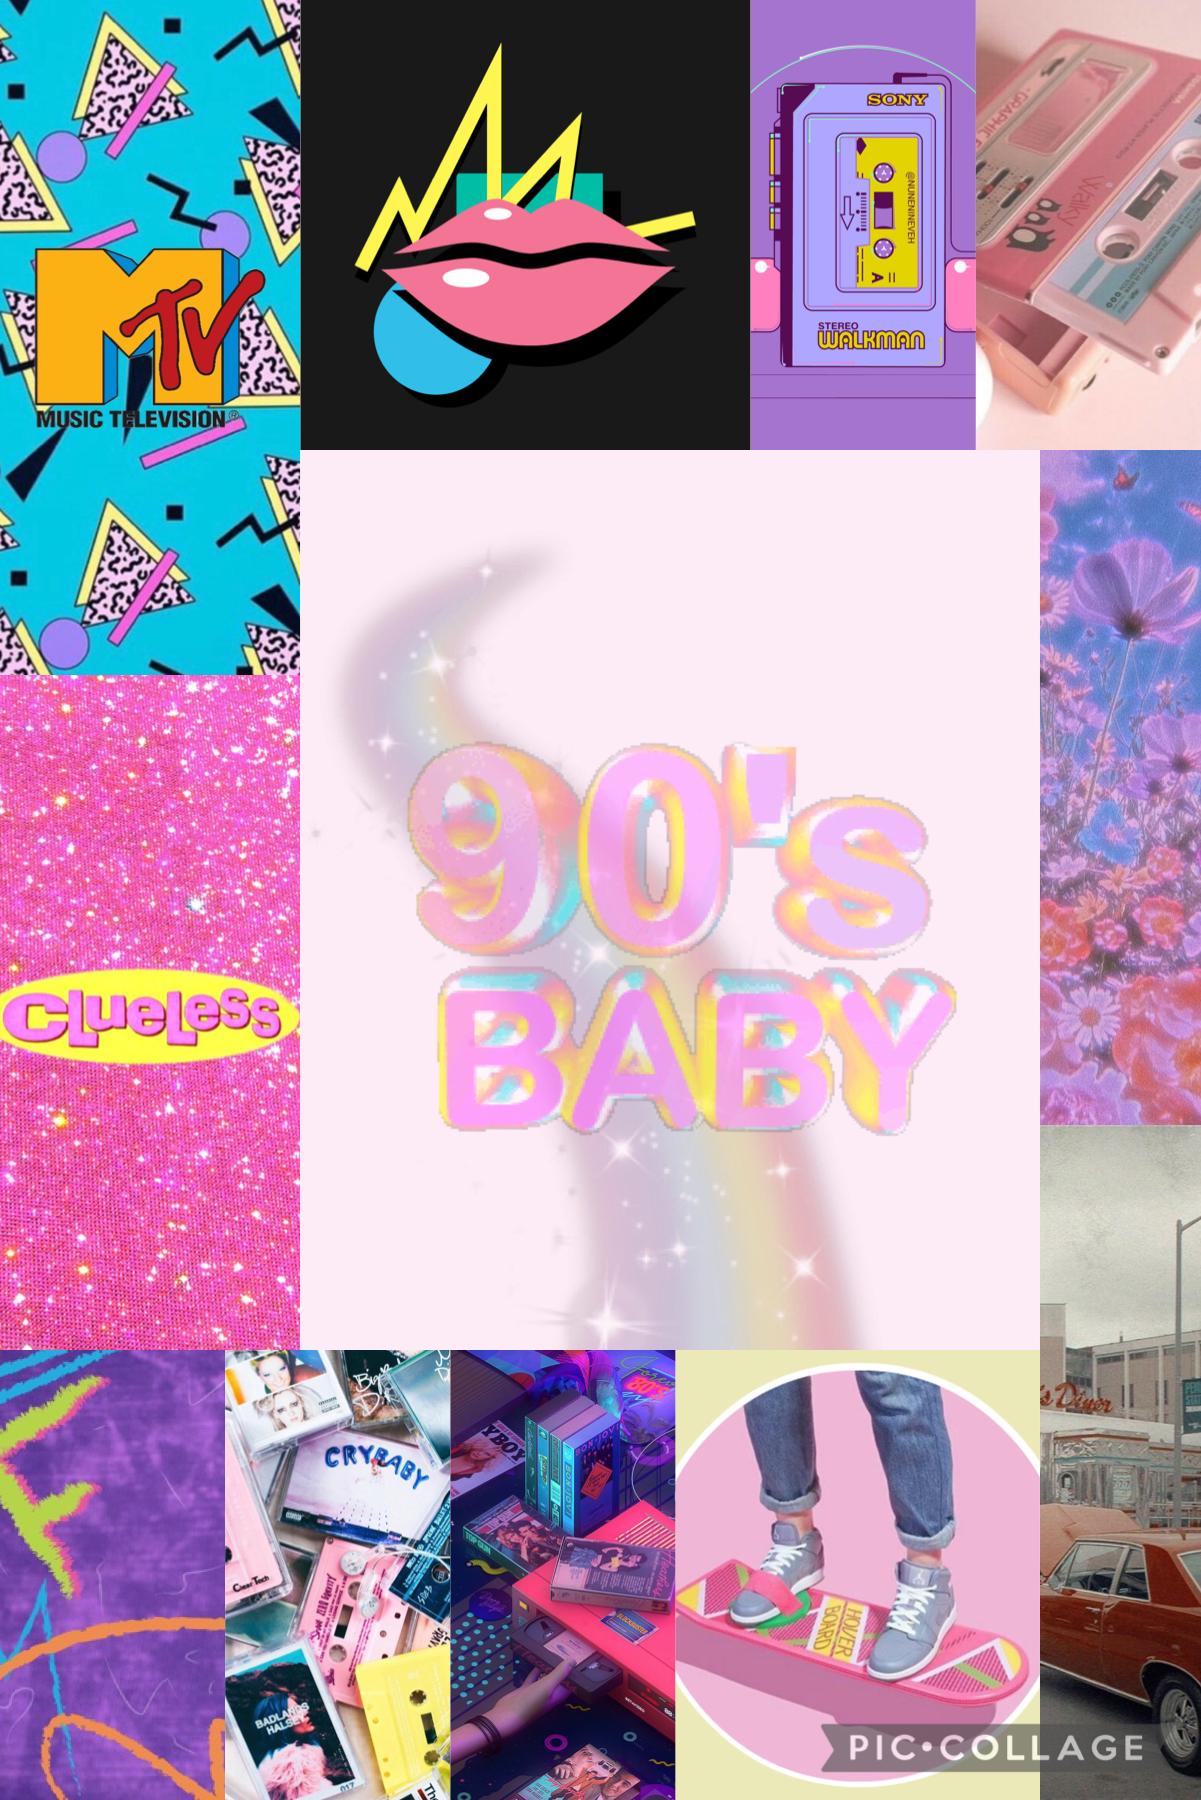 🍌Tap🍌
Here’s a 90s aesthetic! Enjoy! 💕